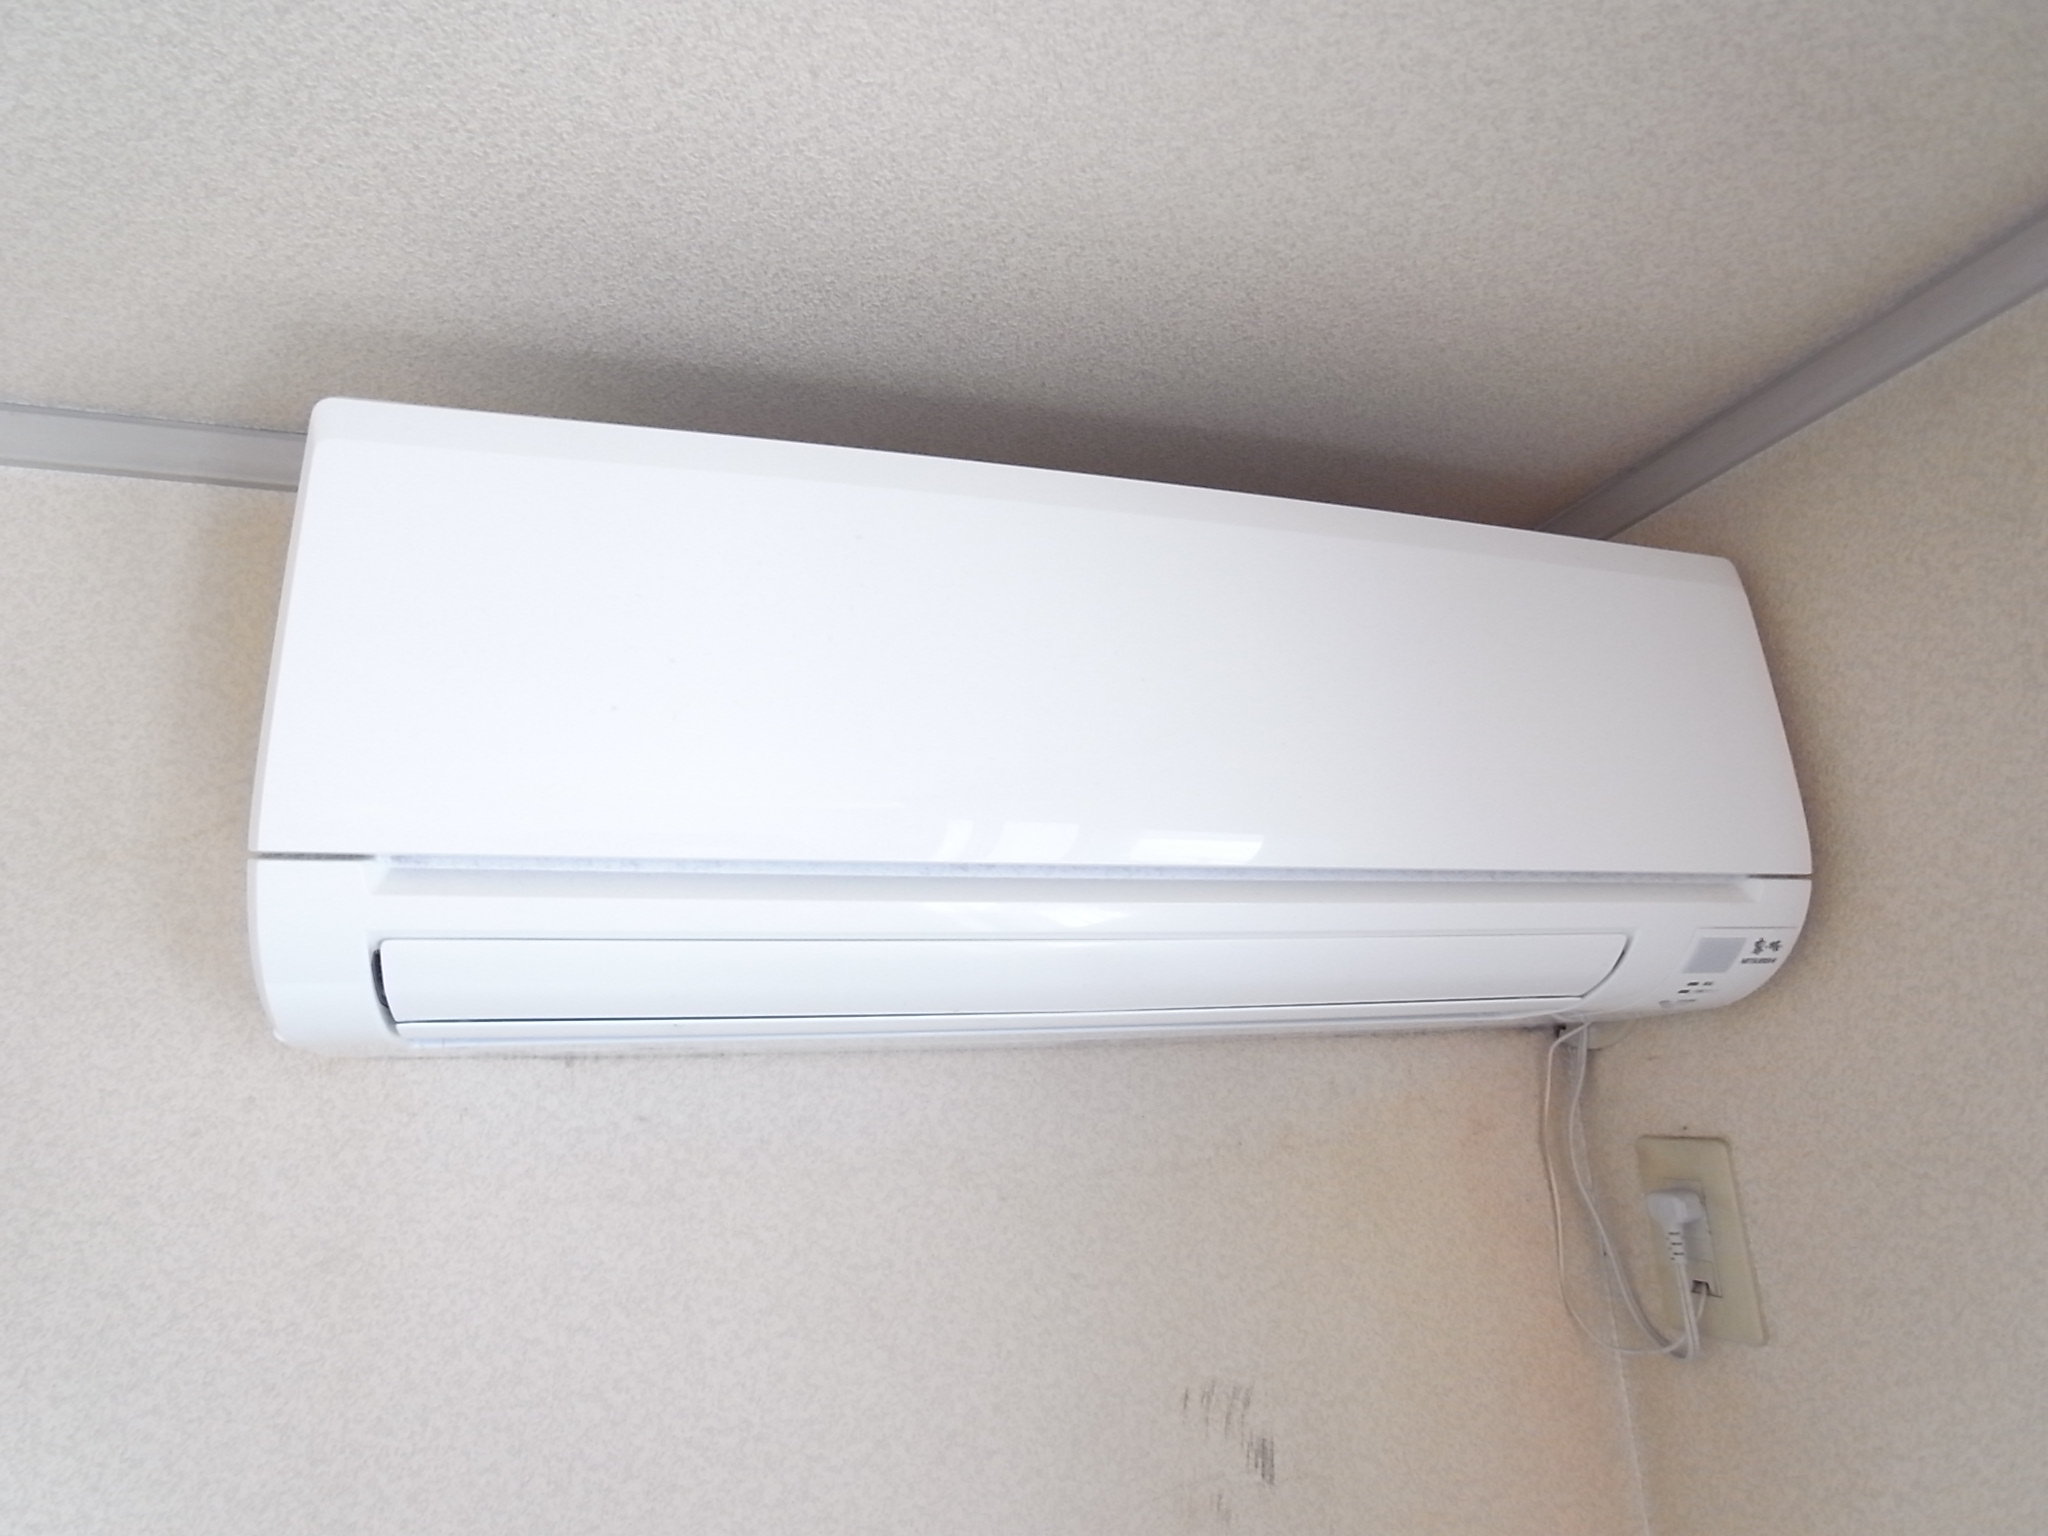 Other Equipment. LDK13.6 Pledge air conditioning